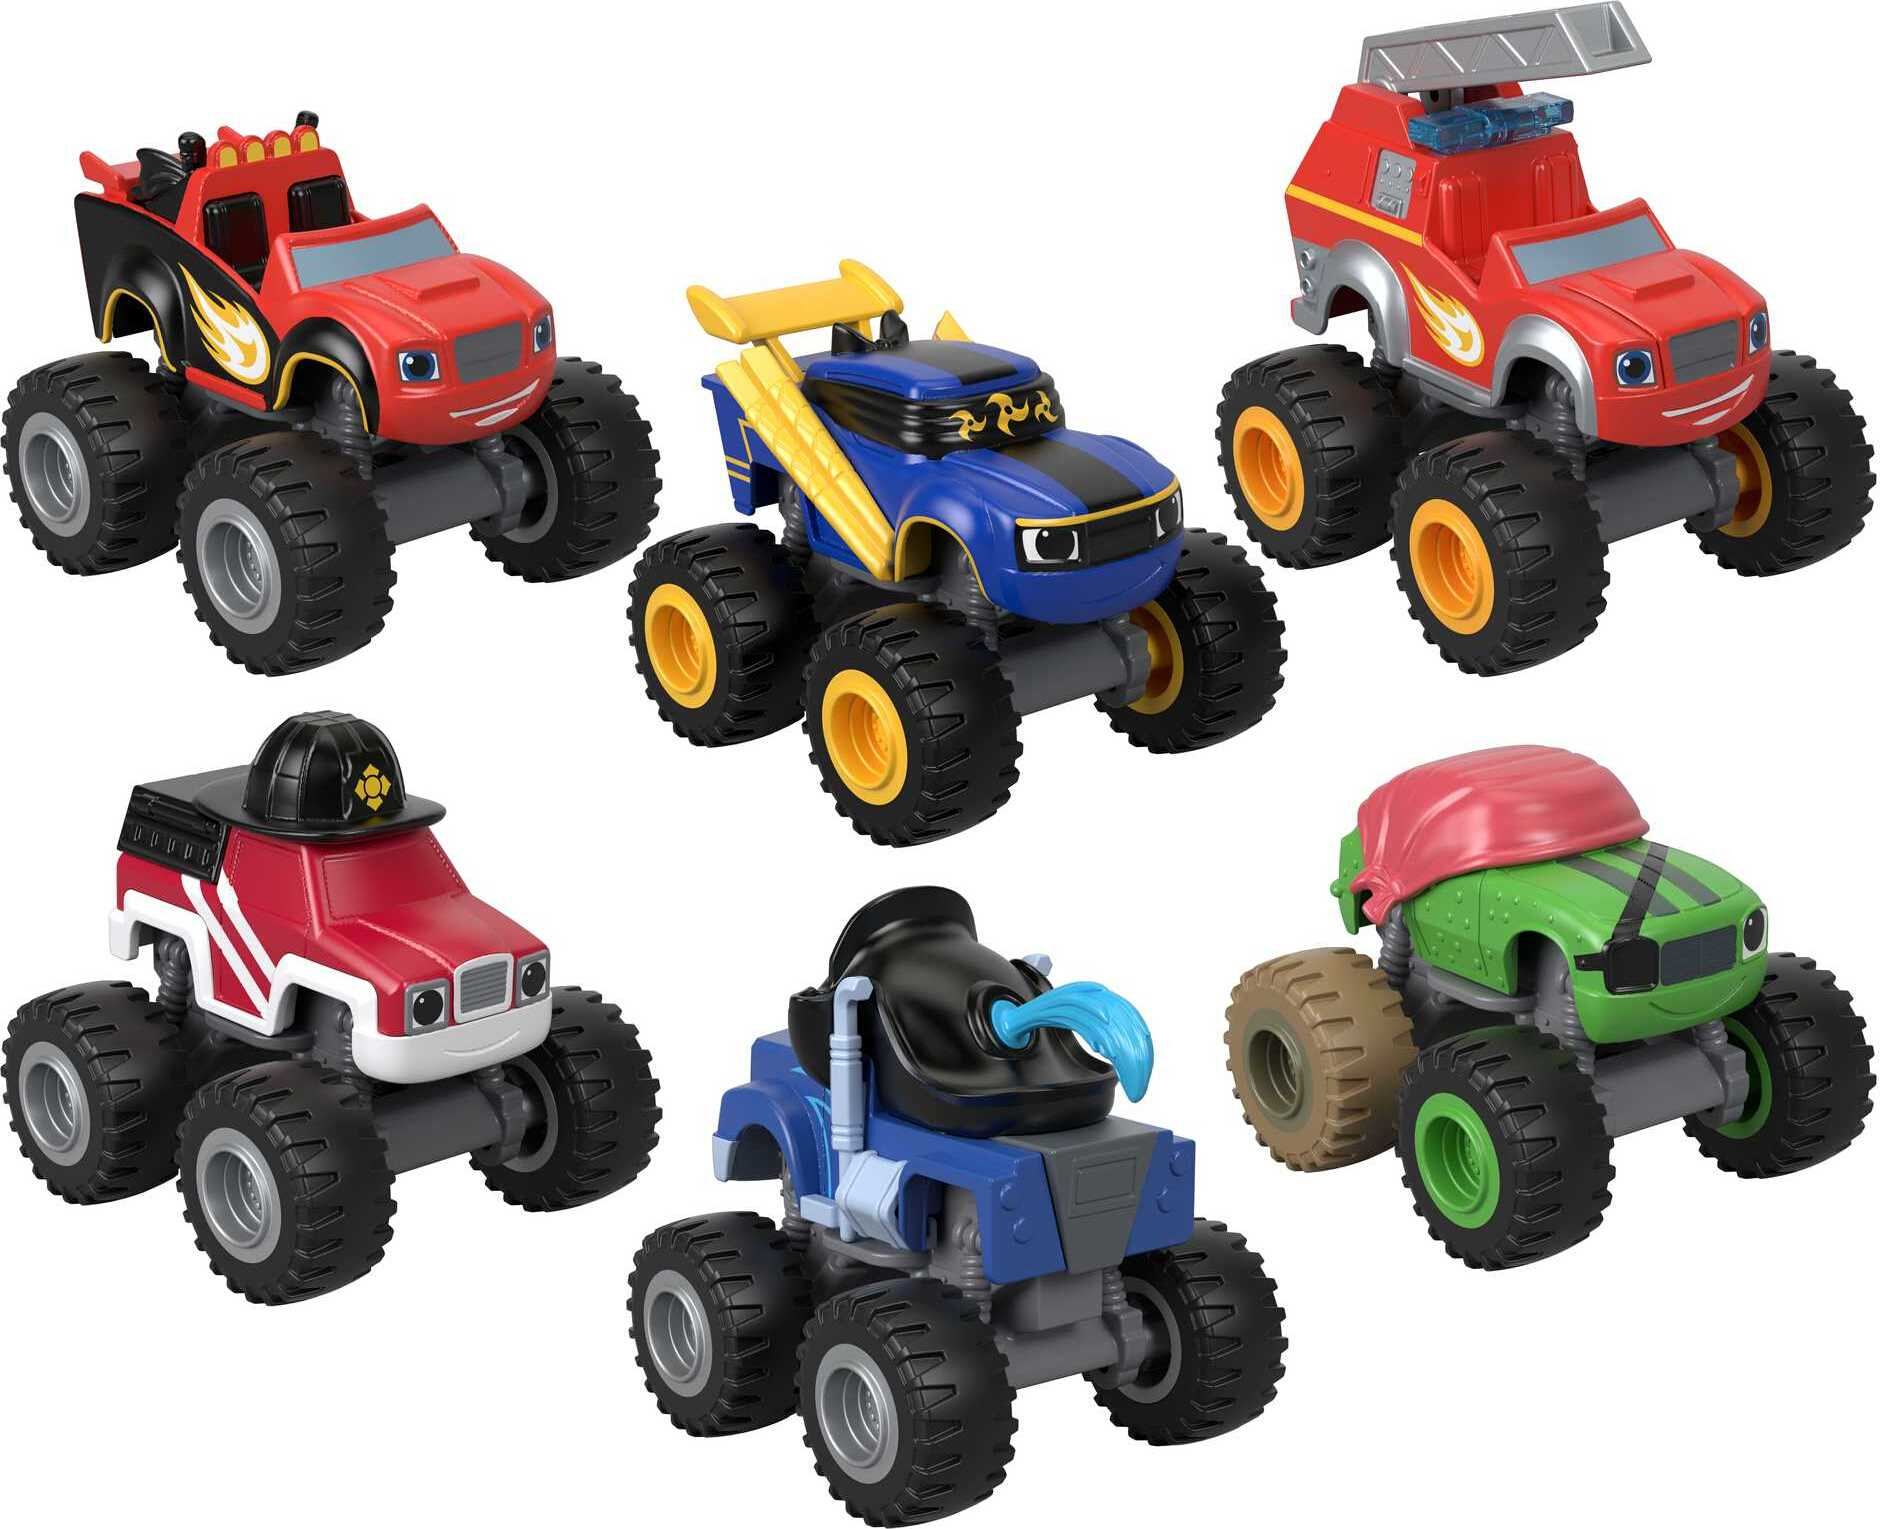 Fisher-Price Blaze & the Monster Machines Diecast Monster Truck Collection, Styles May Vary - image 1 of 6